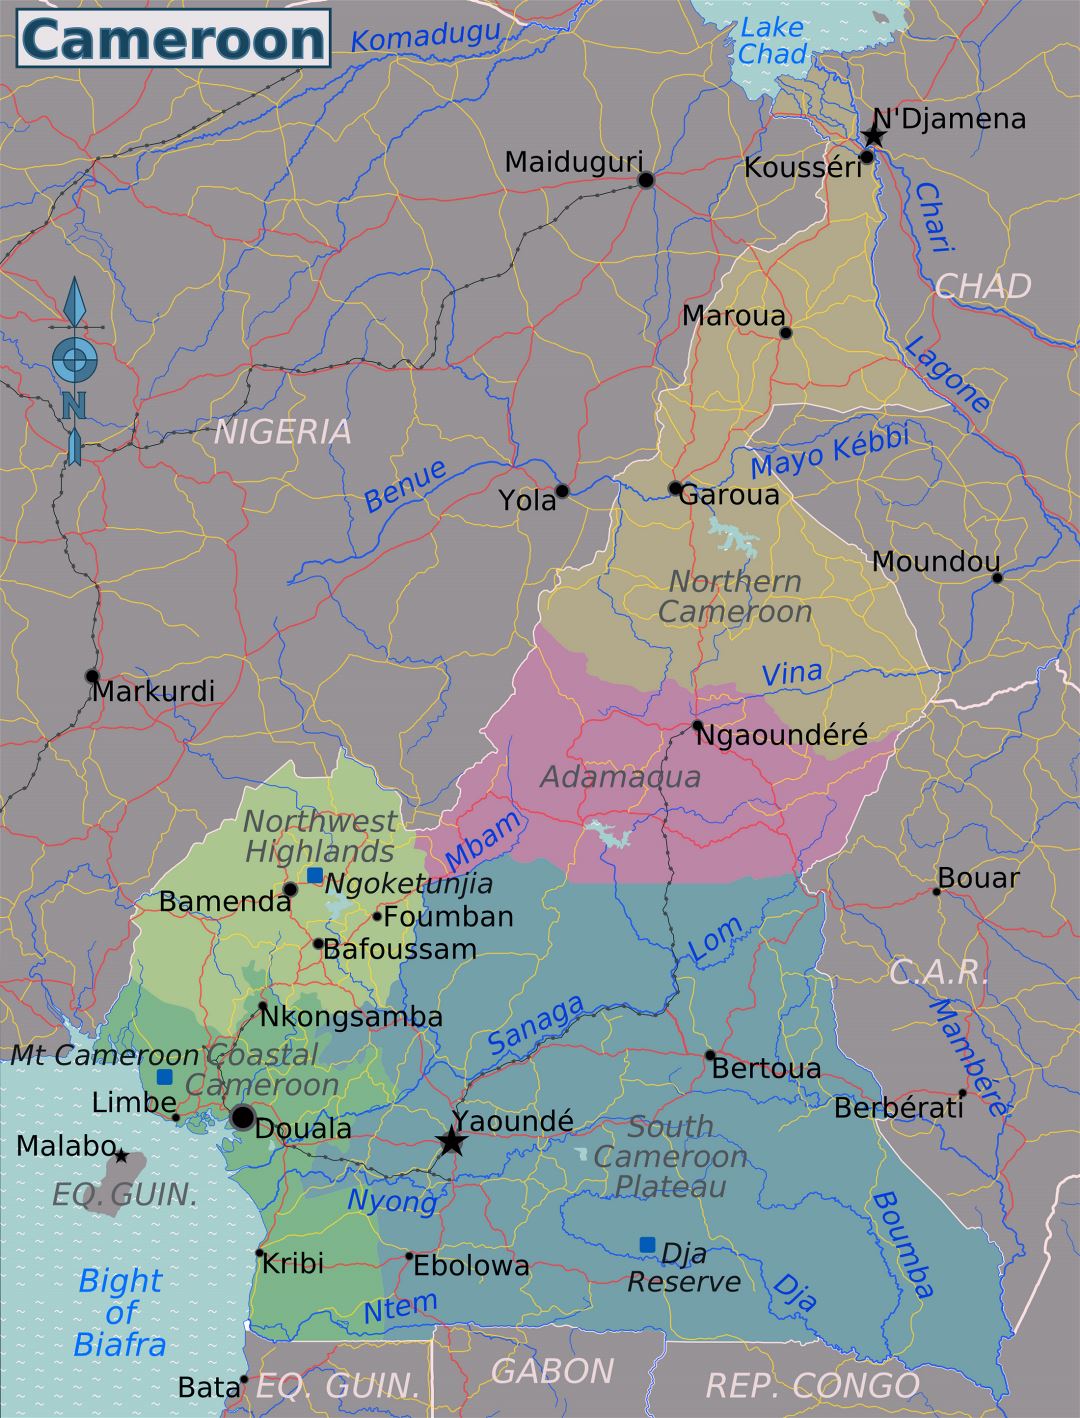 Large regions map of Cameroon